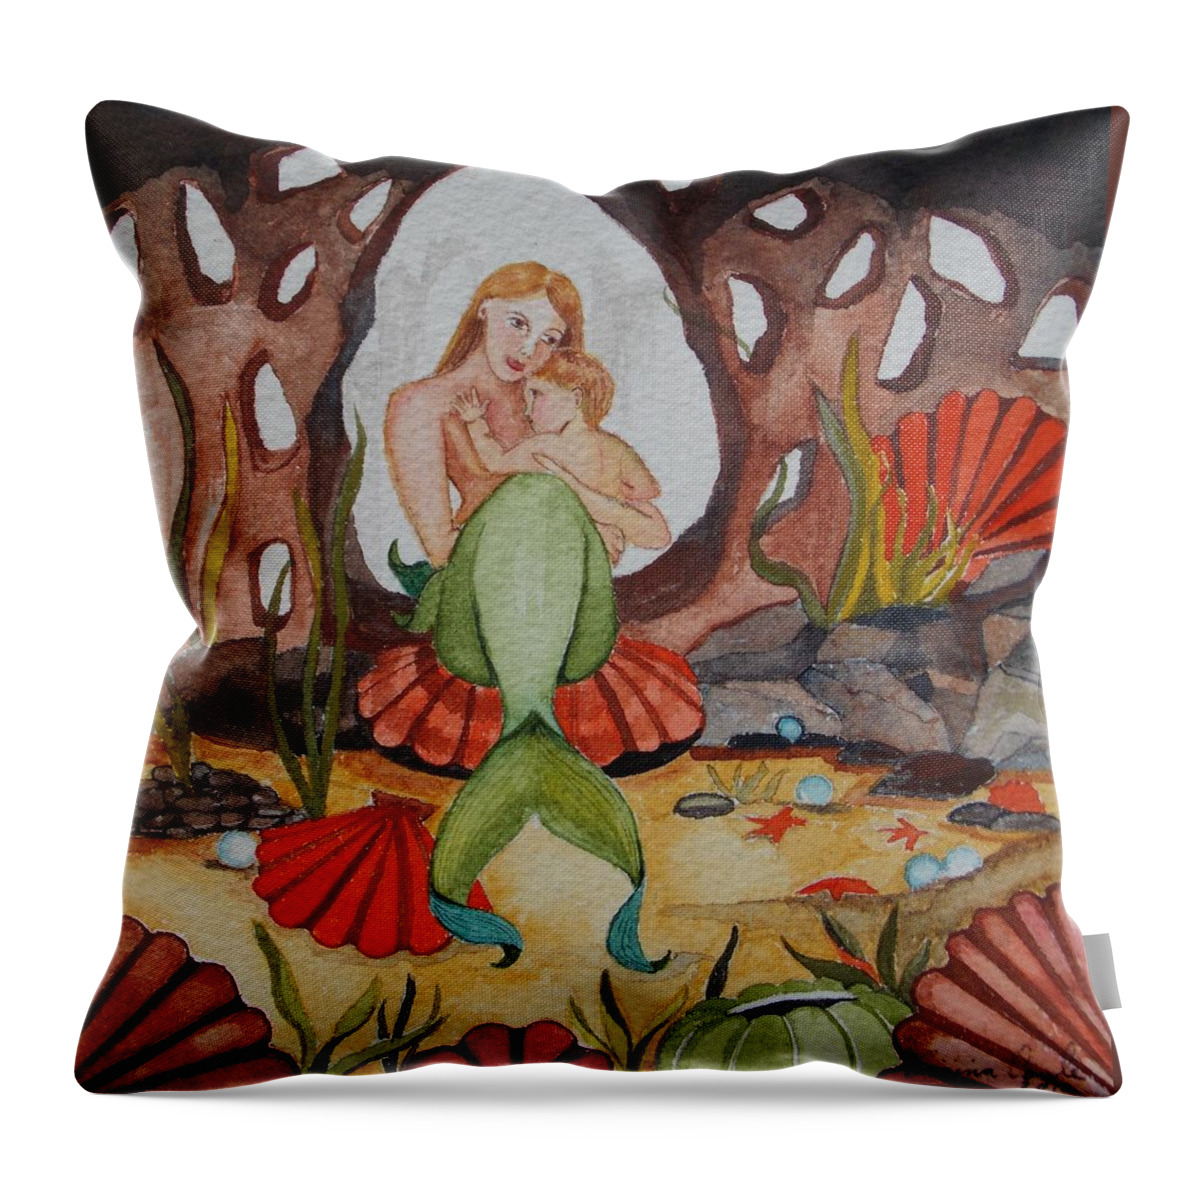 Mermaid Throw Pillow featuring the painting The Most Precious Treasure by Virginia Coyle